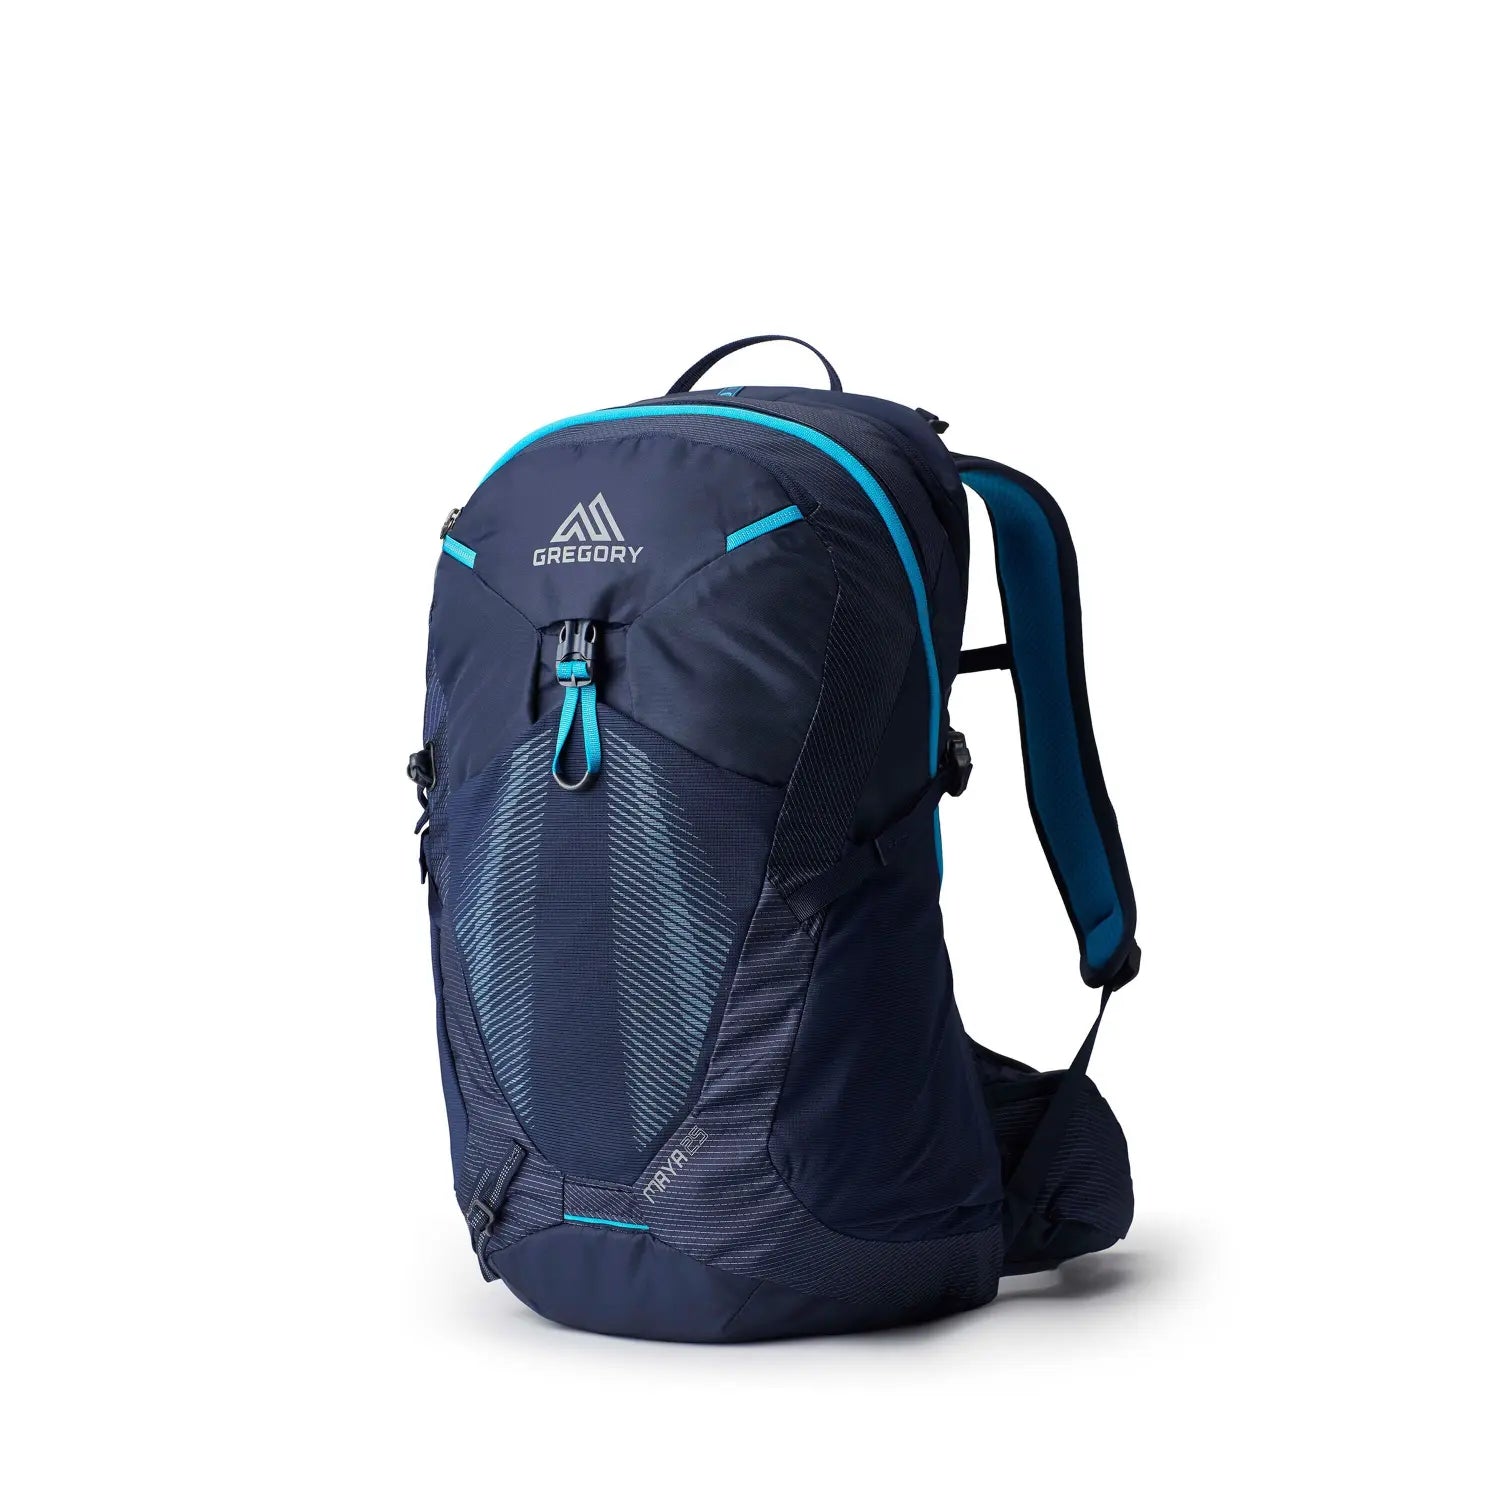 Gregory Women's Maya 25L shown in the Storm Blue option. Front view.